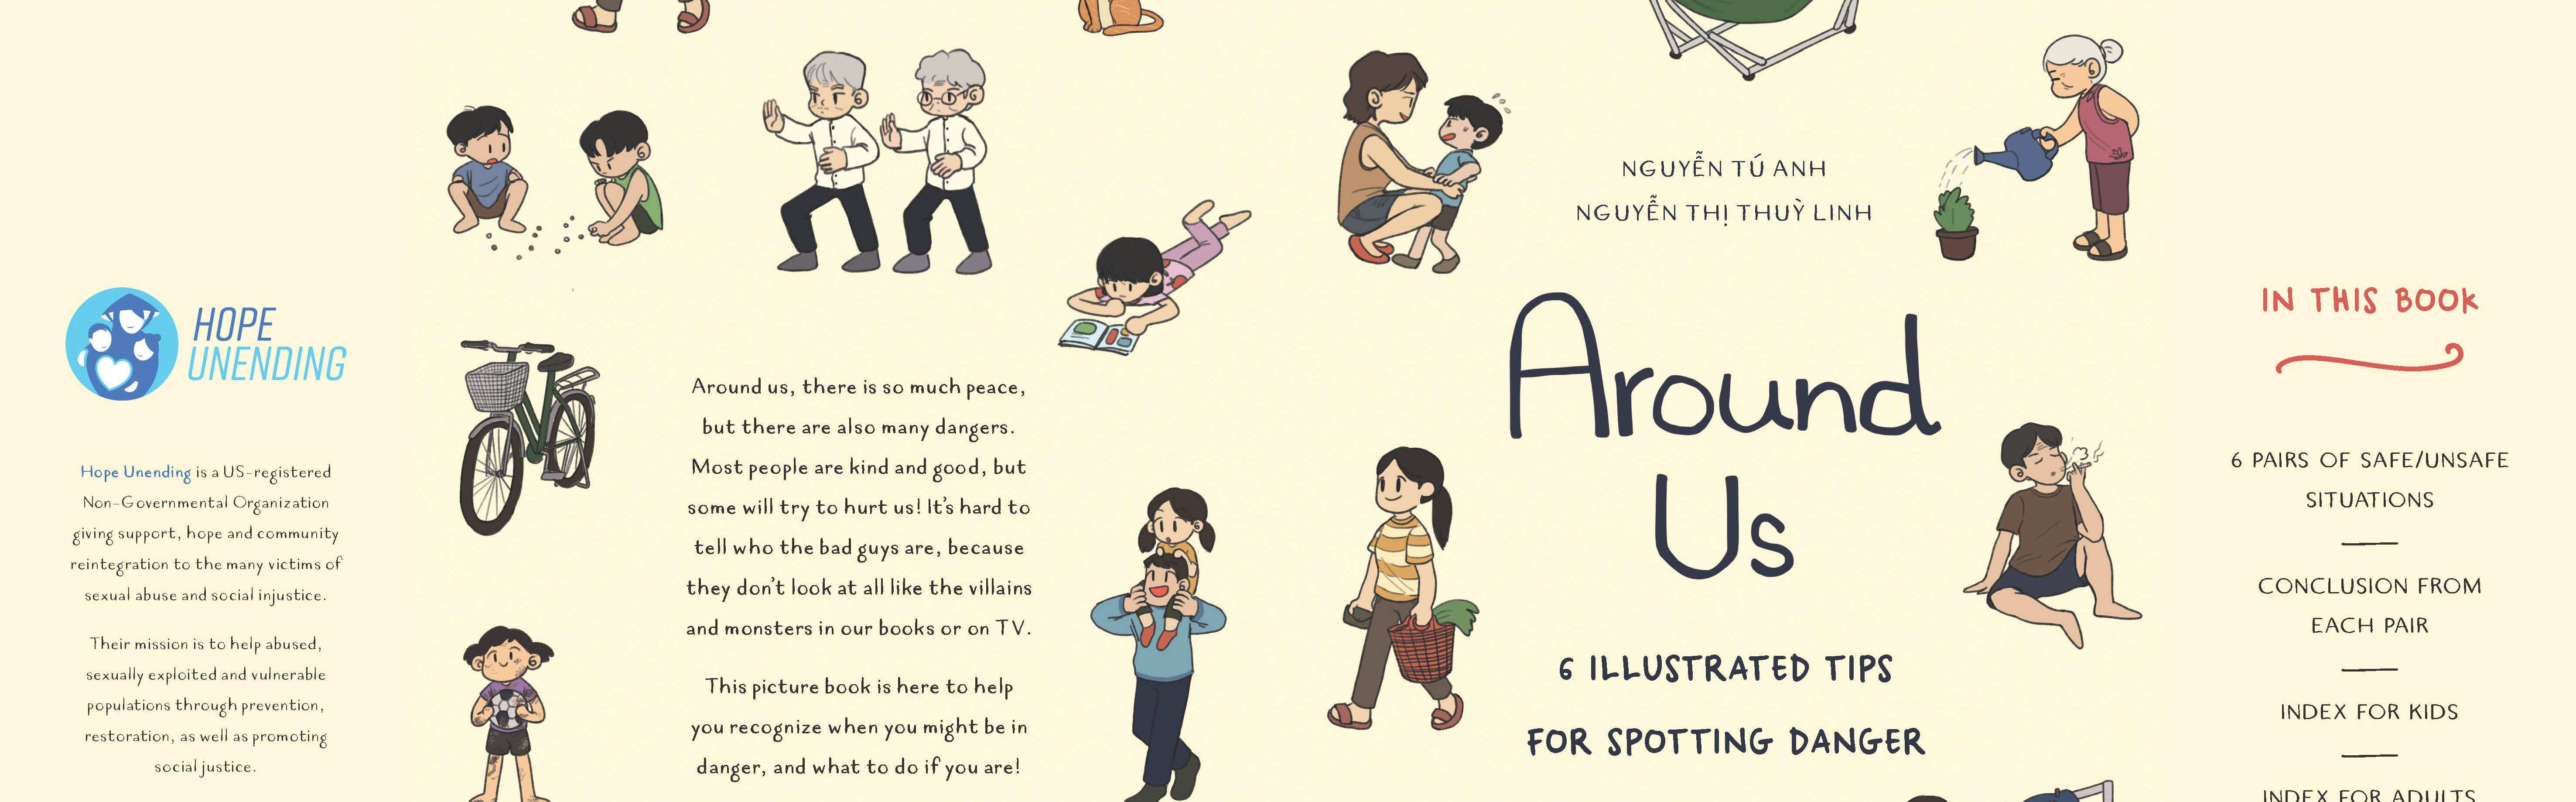 The children’s picture book, ‘Around Us’ includes six pairs of situations that a child can encounter in a diverse range of settings, together with the tips on how to react, and an index for children and adults respectively.  